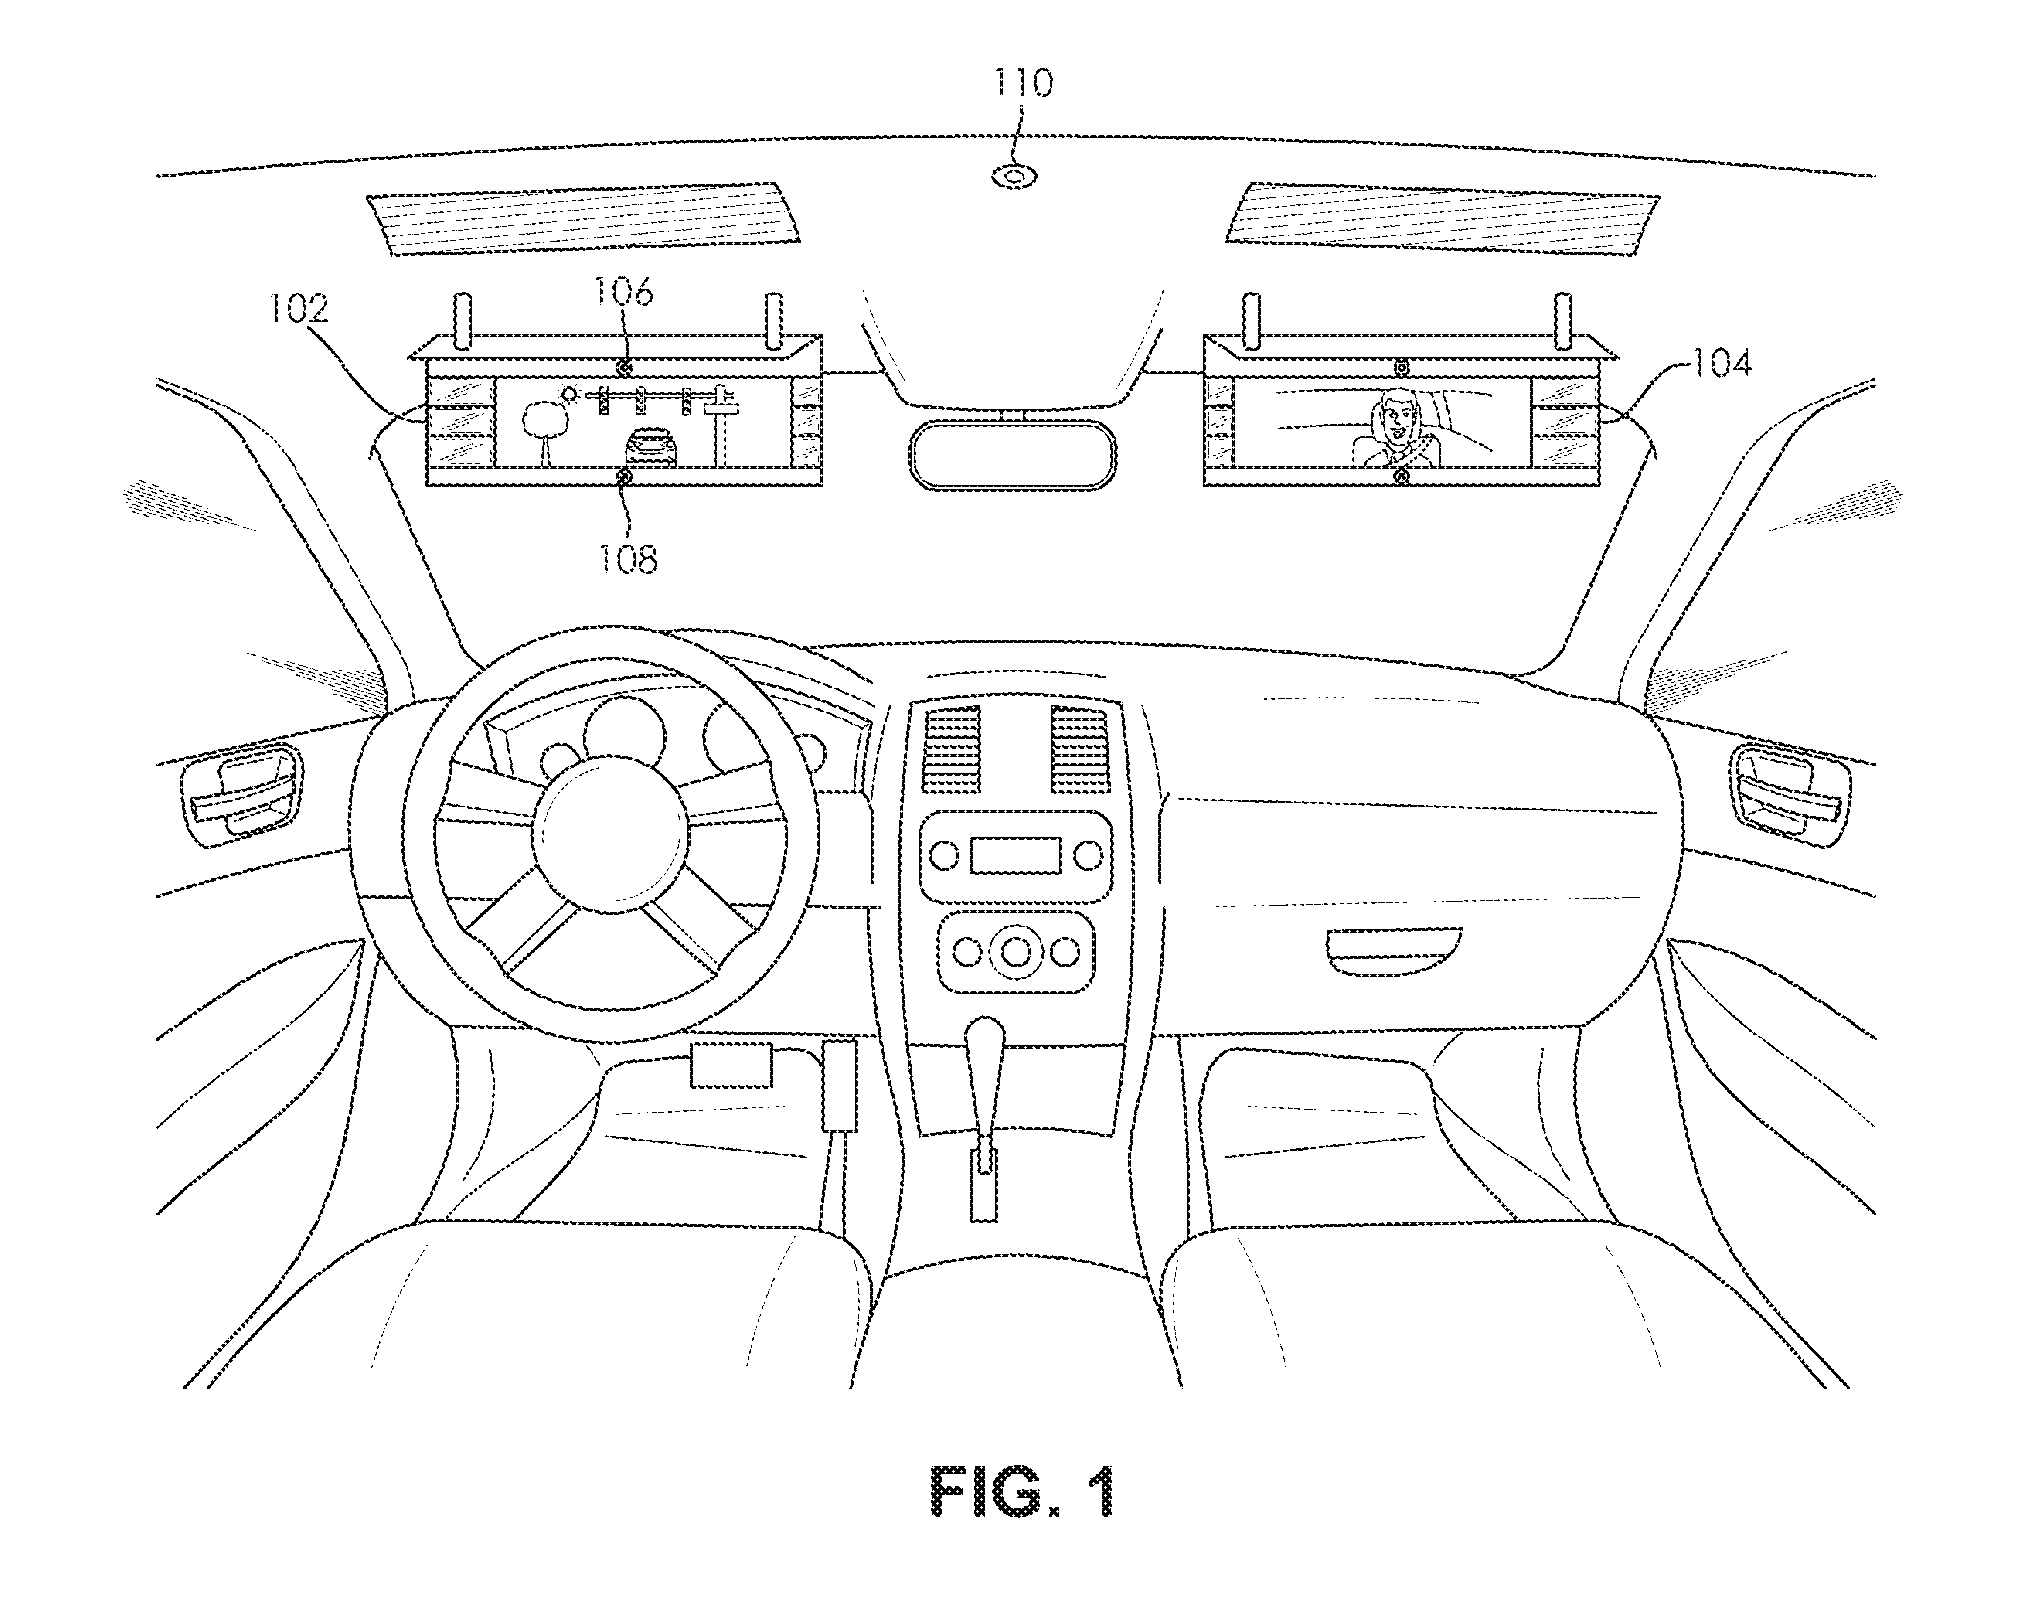 Vehicle sun visor with a multi-functional touch screen with multiple camera views and photo video capability